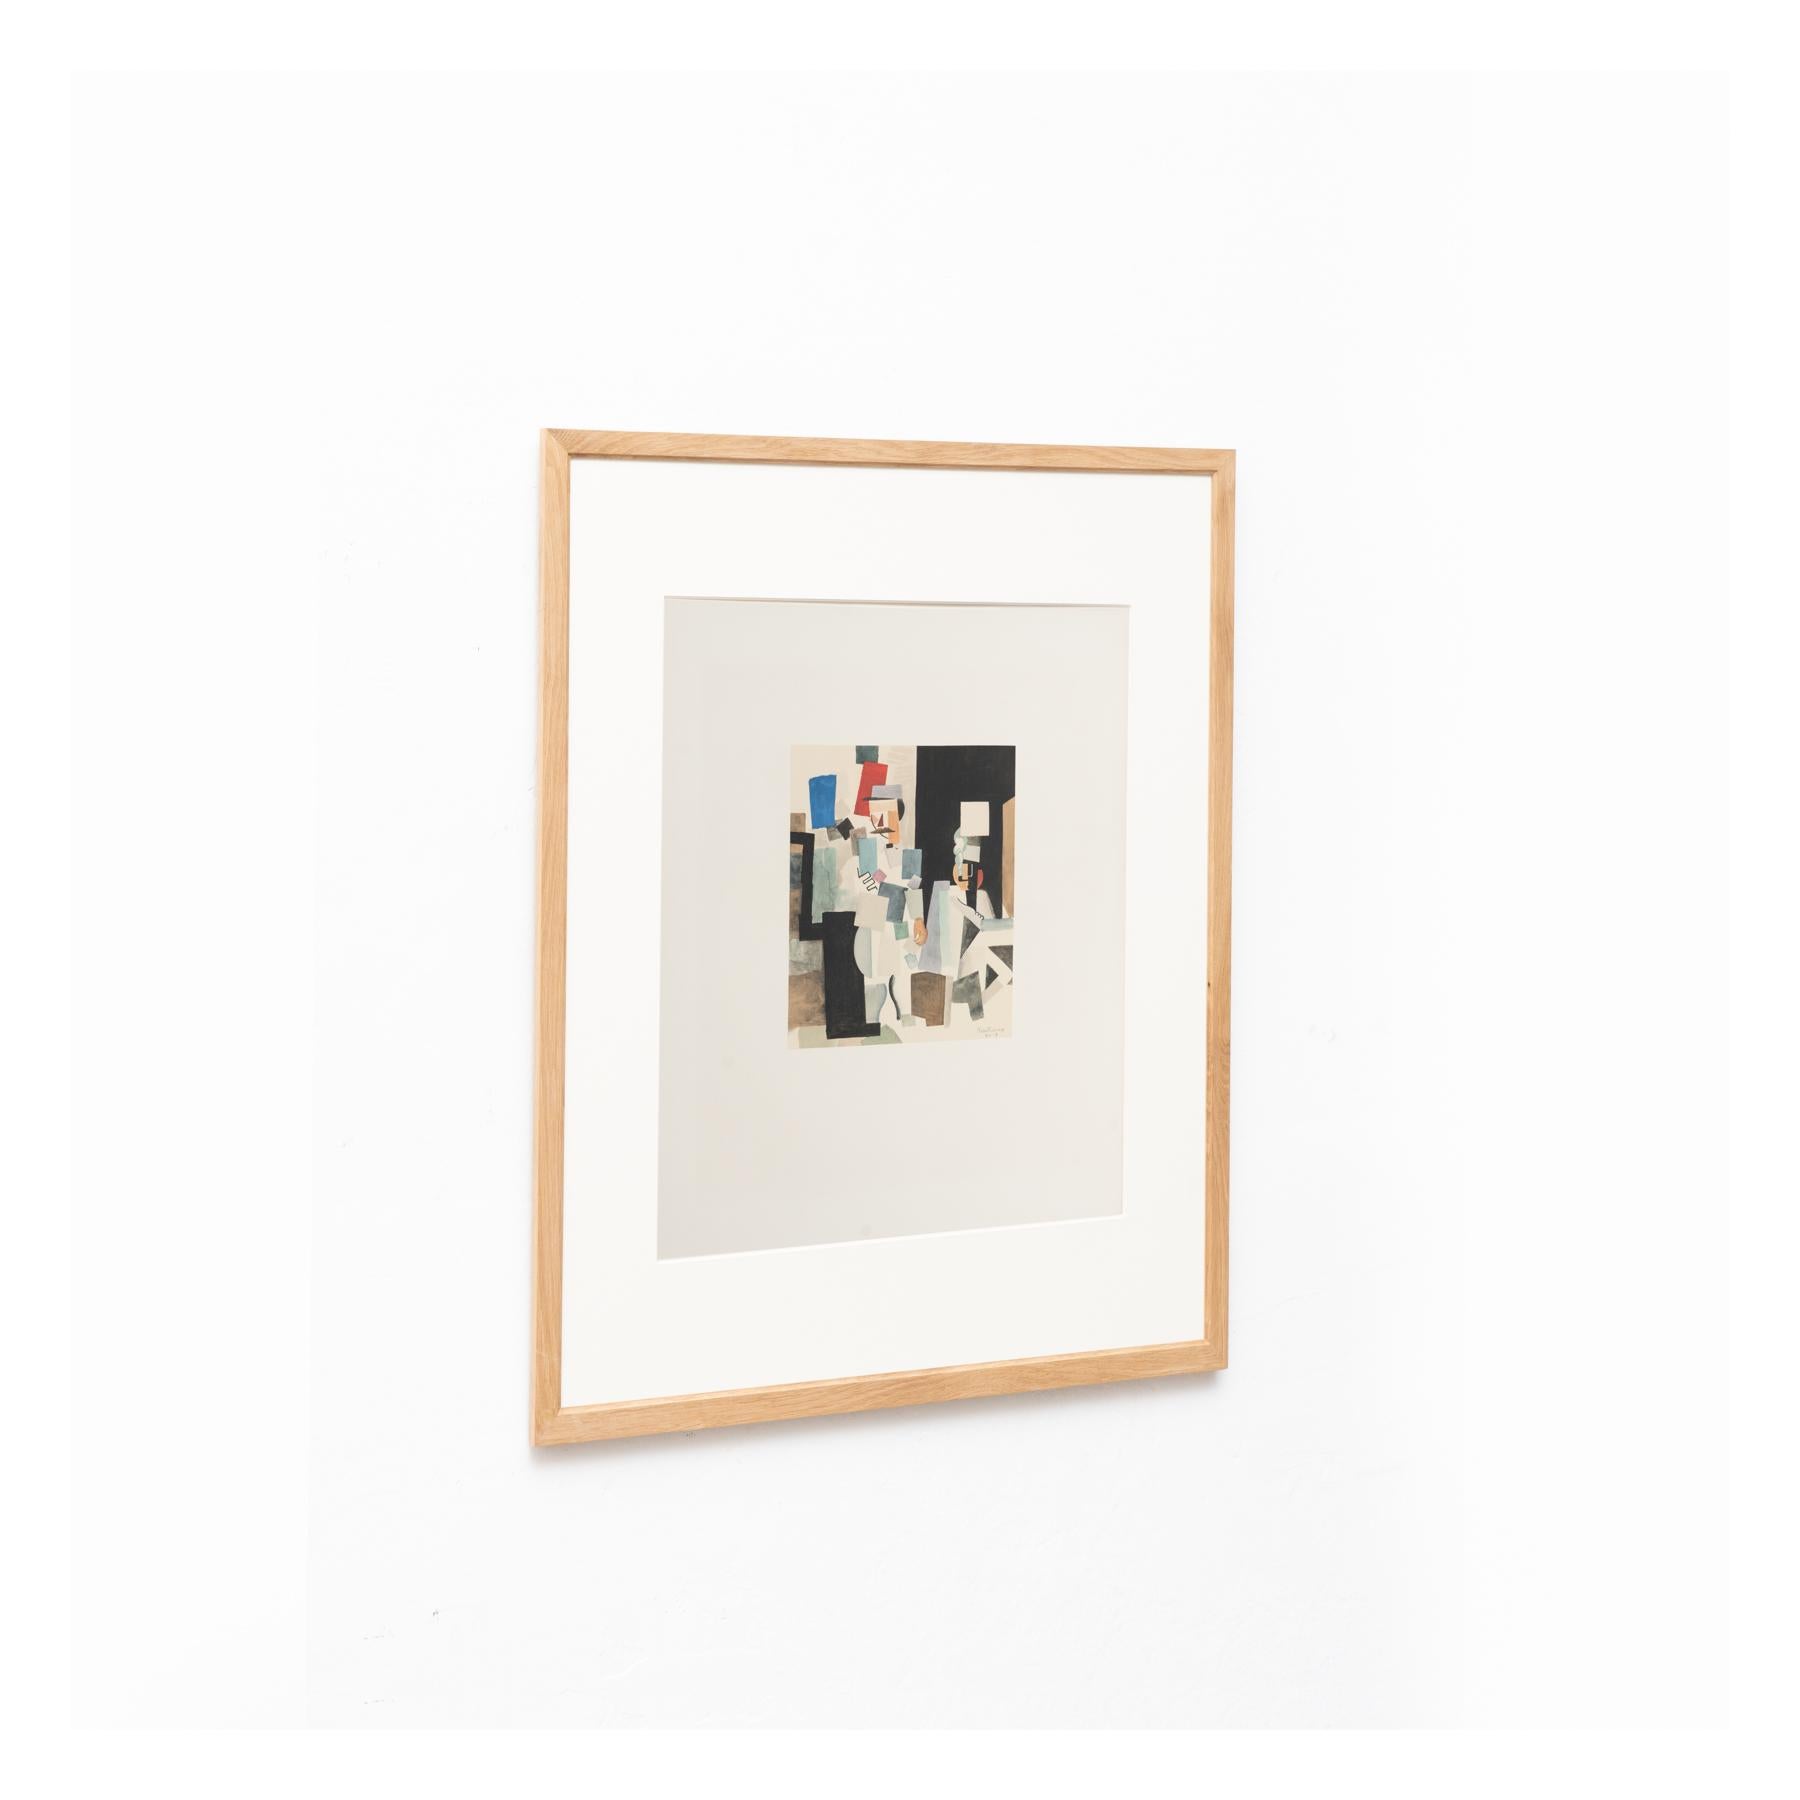 French Roger de la Fresnaye 'Scene Militaire' Framed Lithography, circa 1968 For Sale